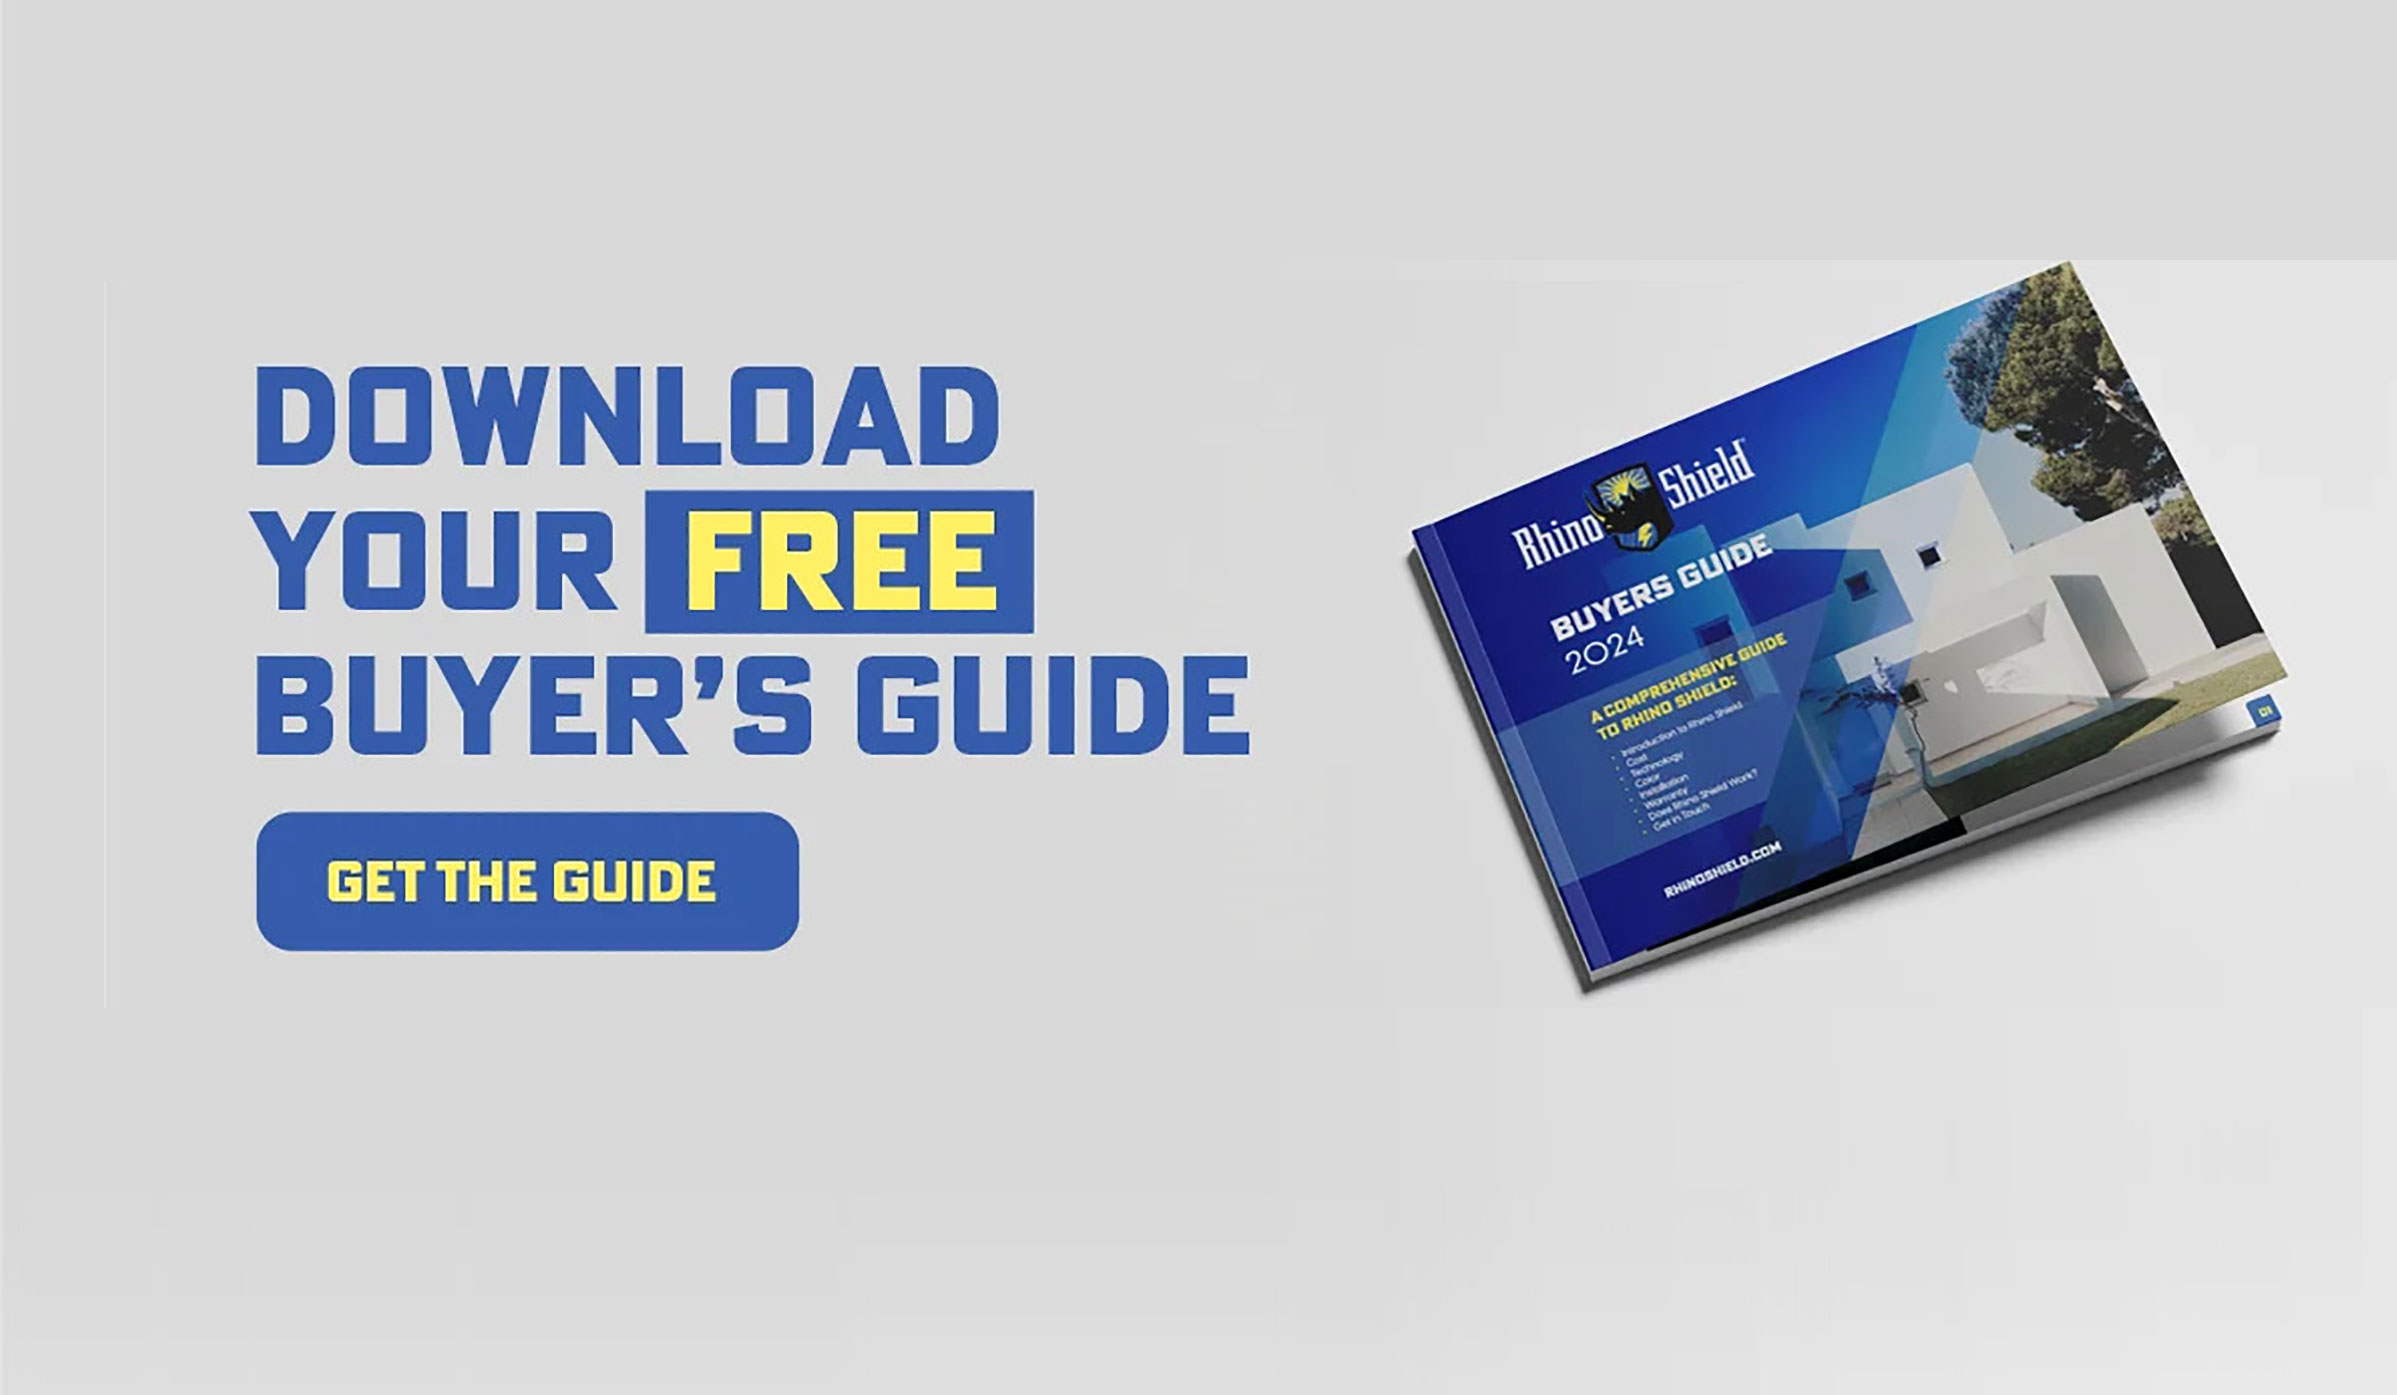 DOWNLOAD THE GUIDE